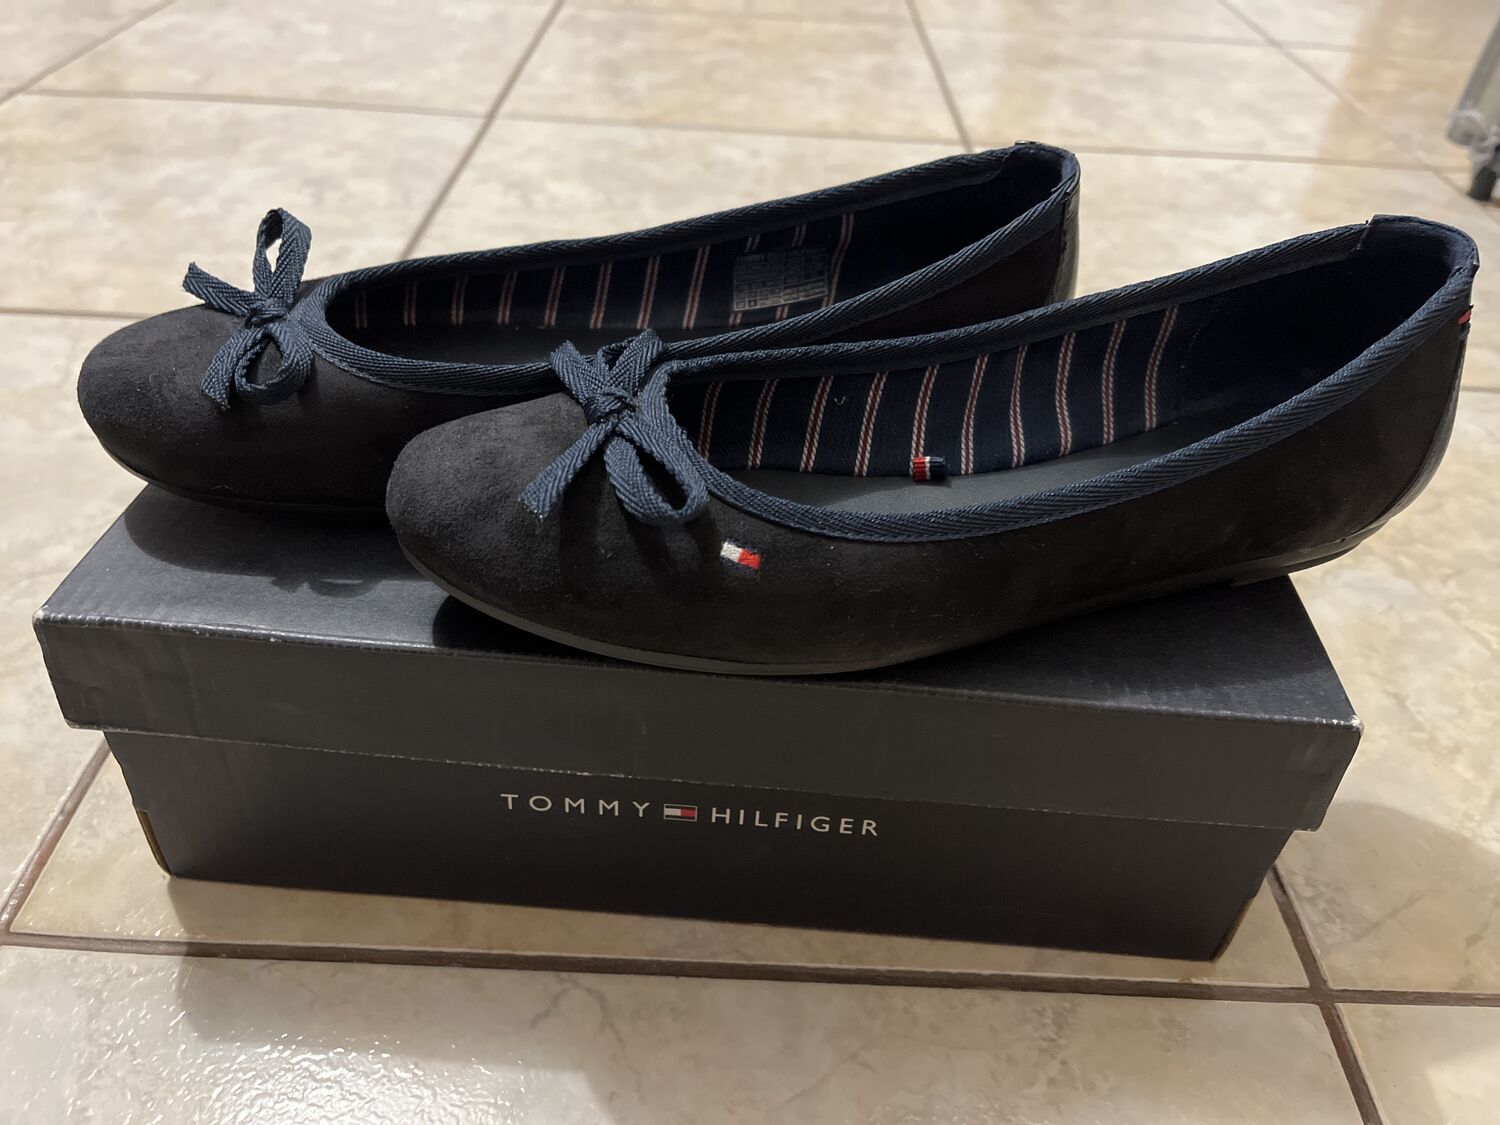 Leather flats Tommy Hilfiger - IT 37, buy pre-owned at 50 EUR